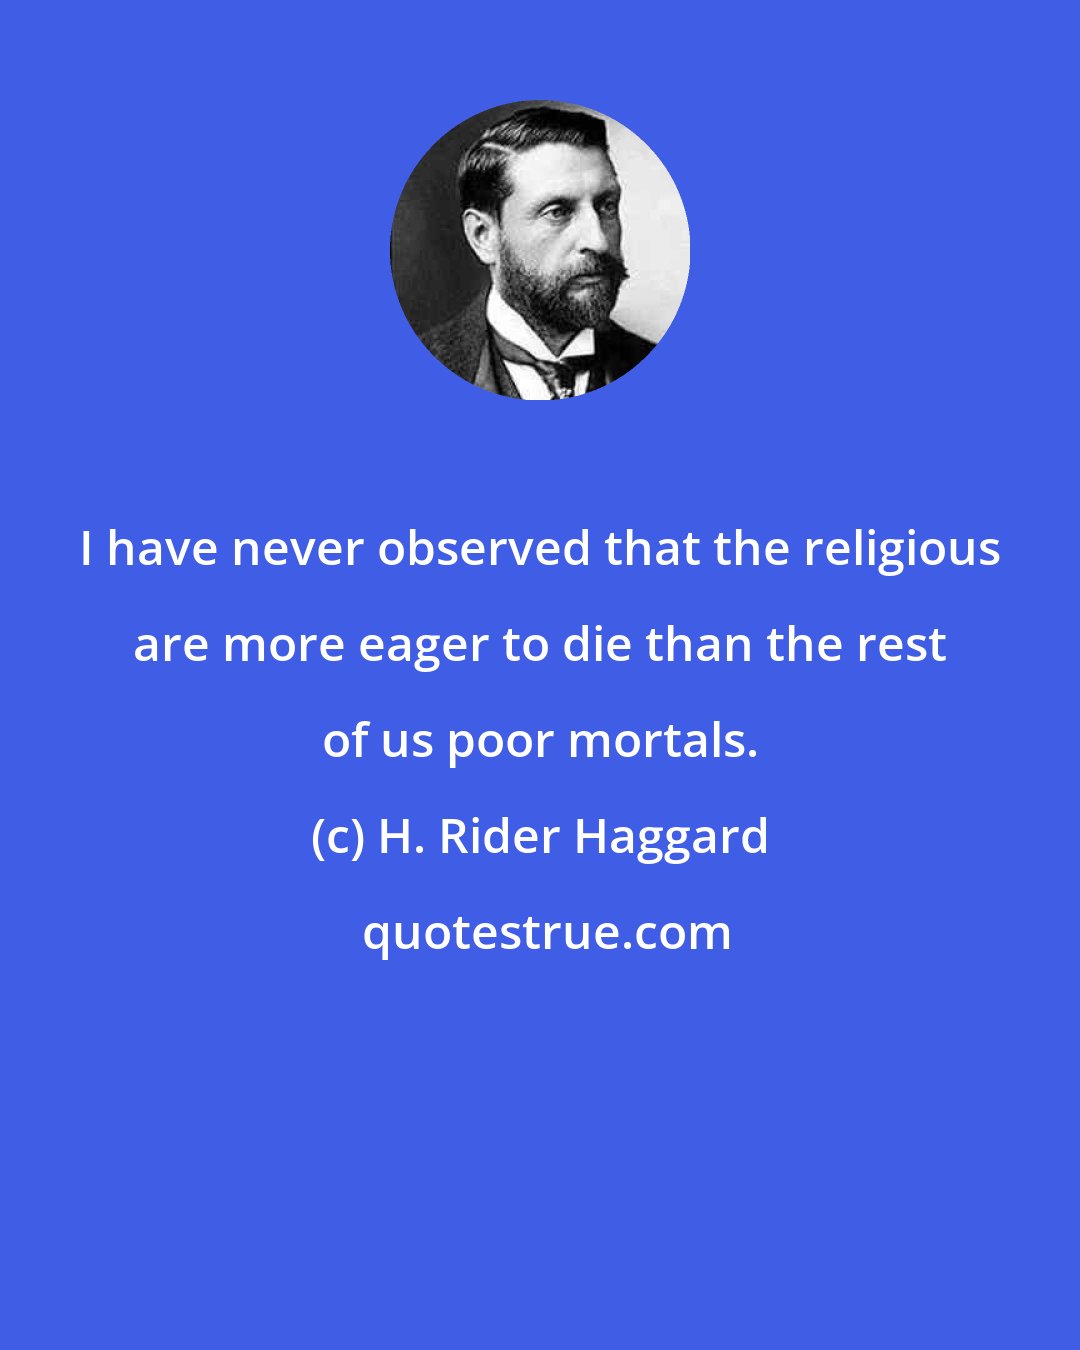 H. Rider Haggard: I have never observed that the religious are more eager to die than the rest of us poor mortals.